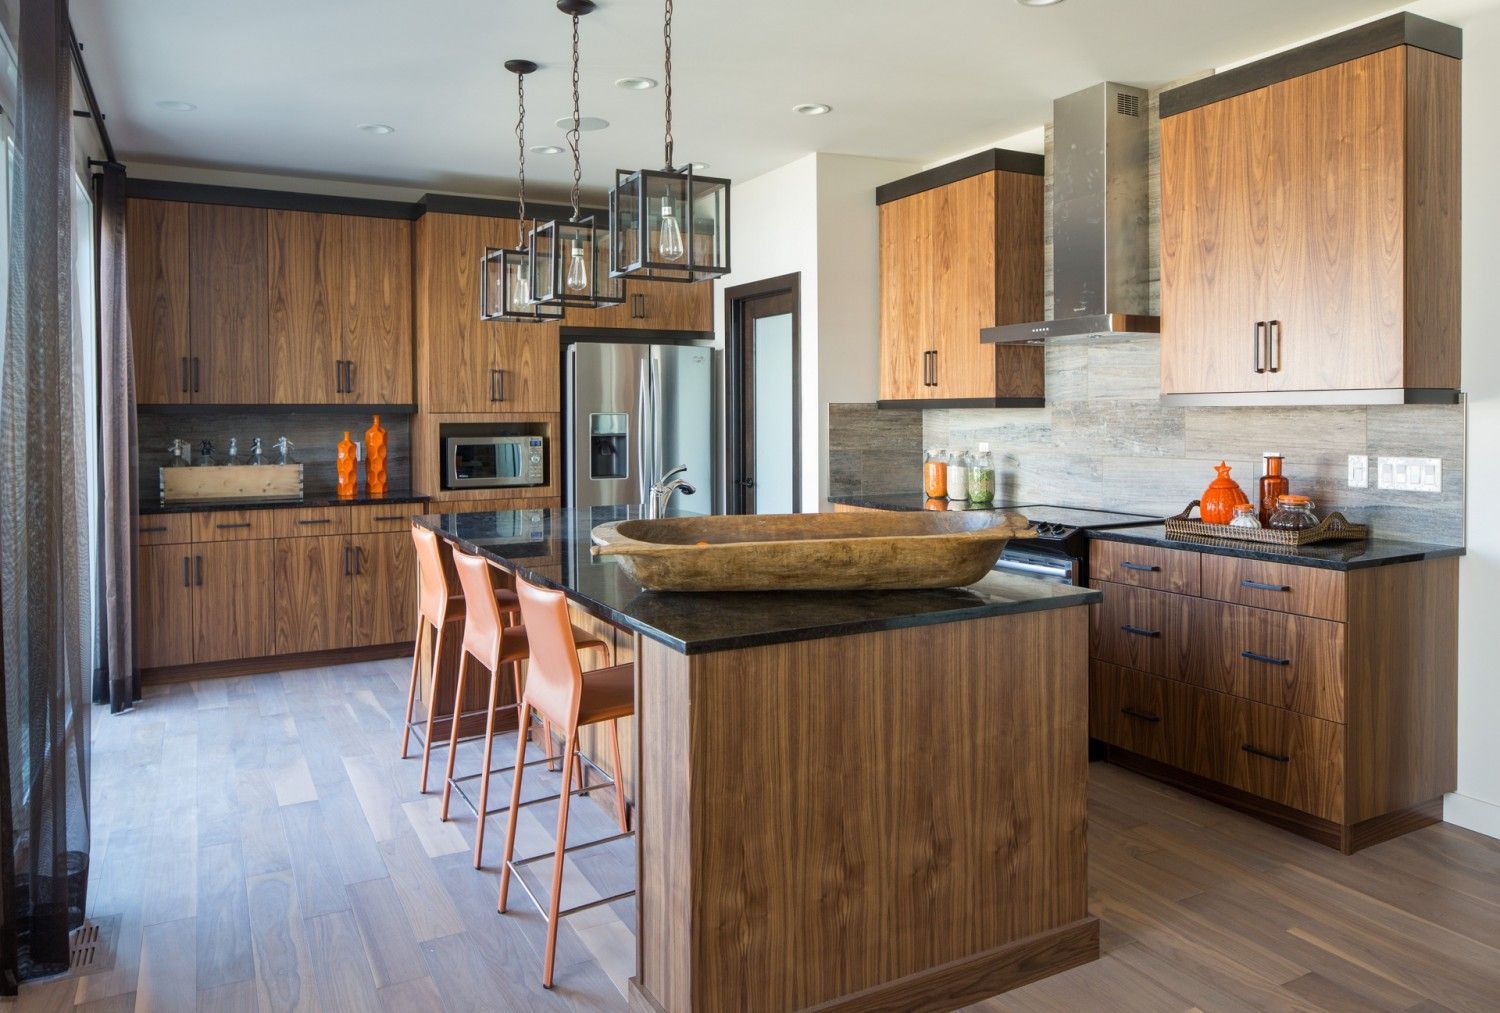 Modern Interior Design Laminate Use. Nice wooden trimmed kitchen of the island layout